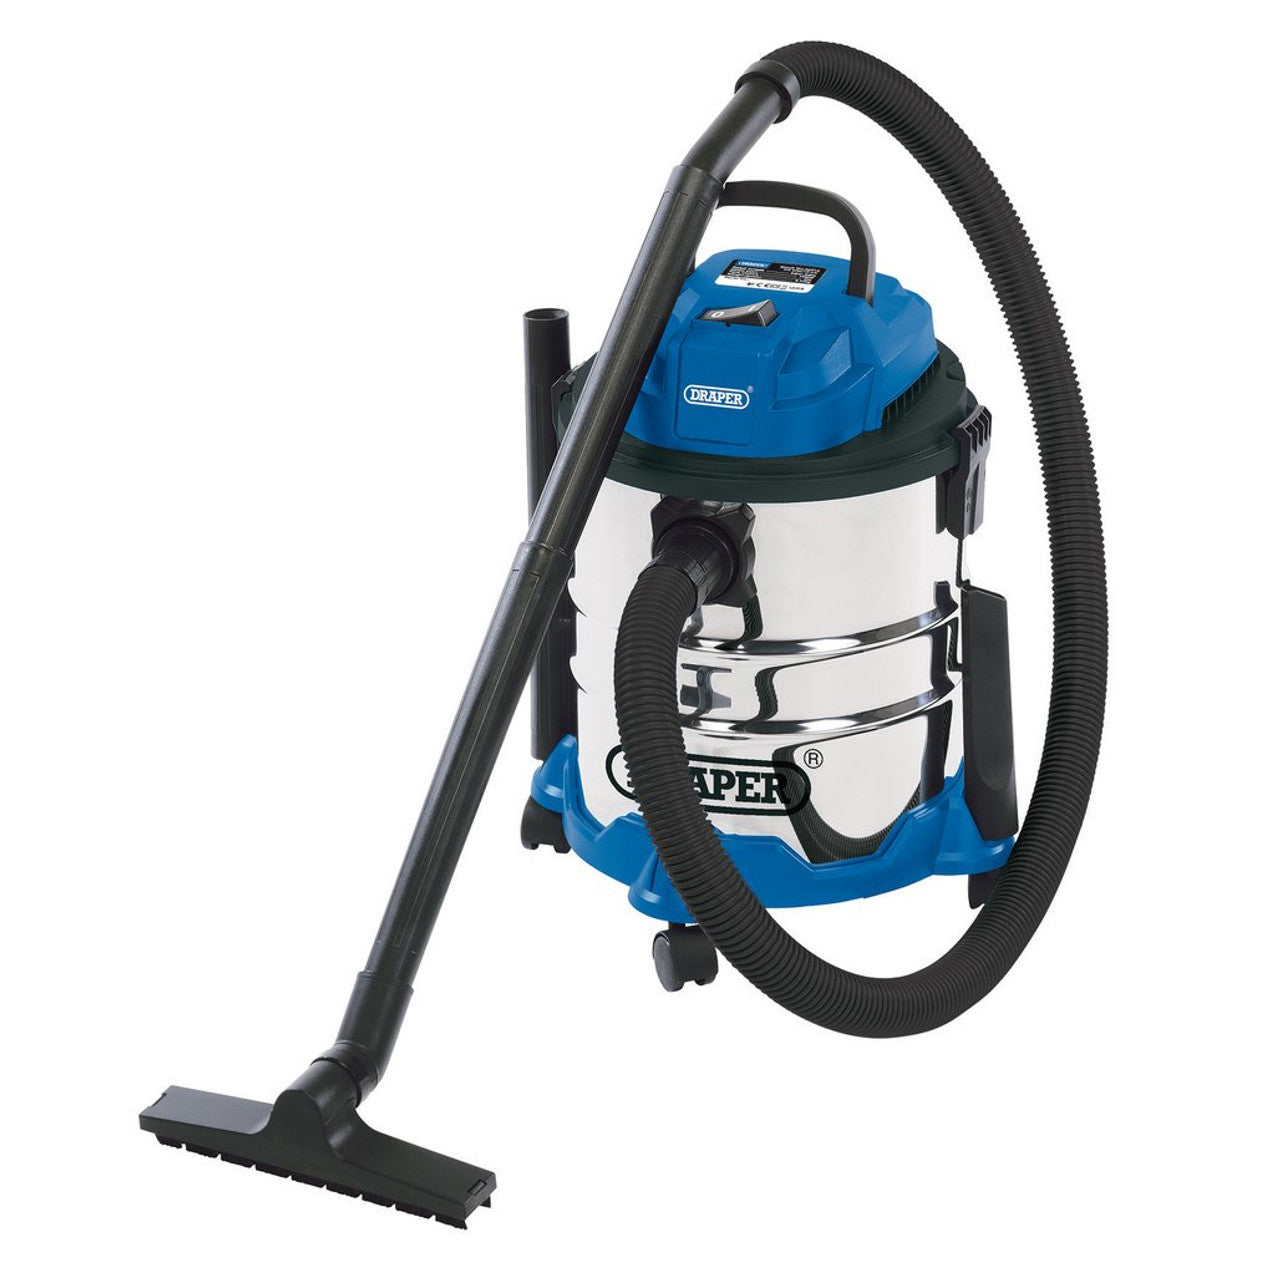 Draper 20515 Wet and Dry Vaccum cleaner with Stainless Steel Tank, 20L, 1250W - 230V